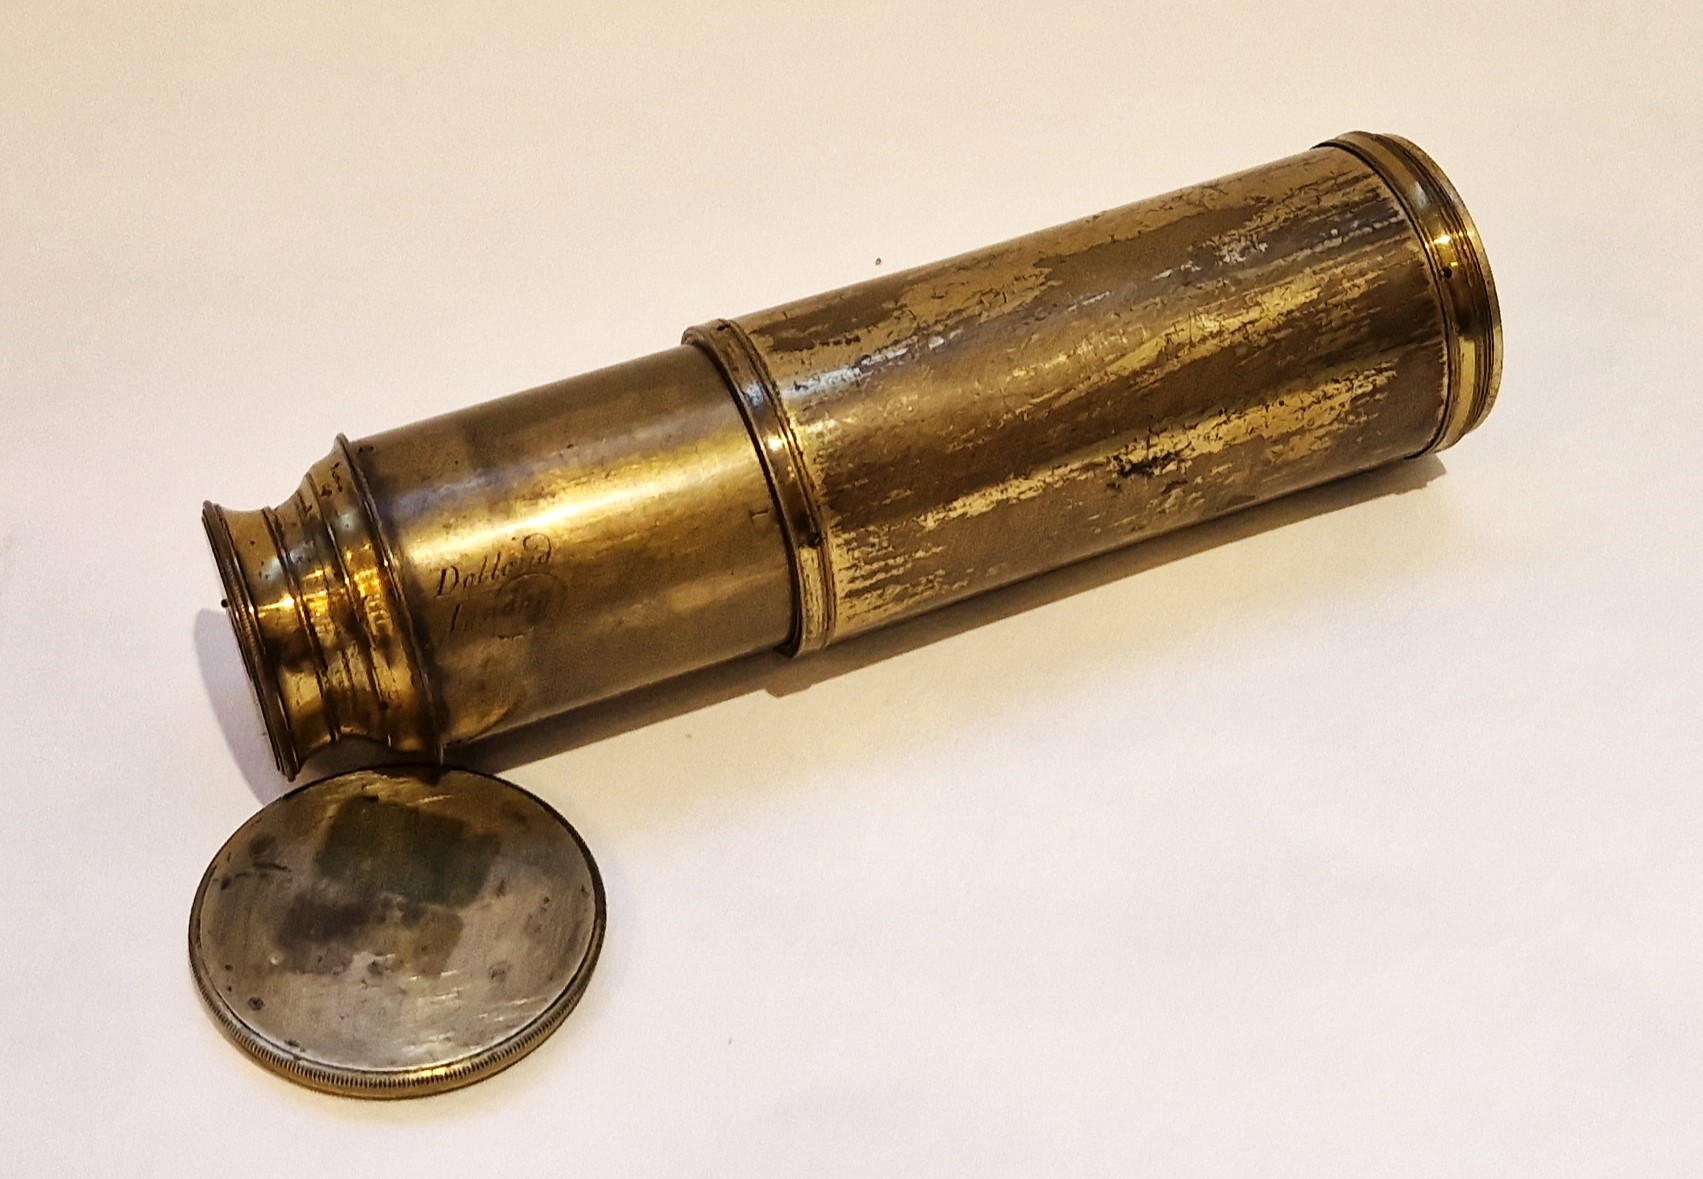 Dollond spyglass with two-lens eyepiece and achromatic objective, circa 1780